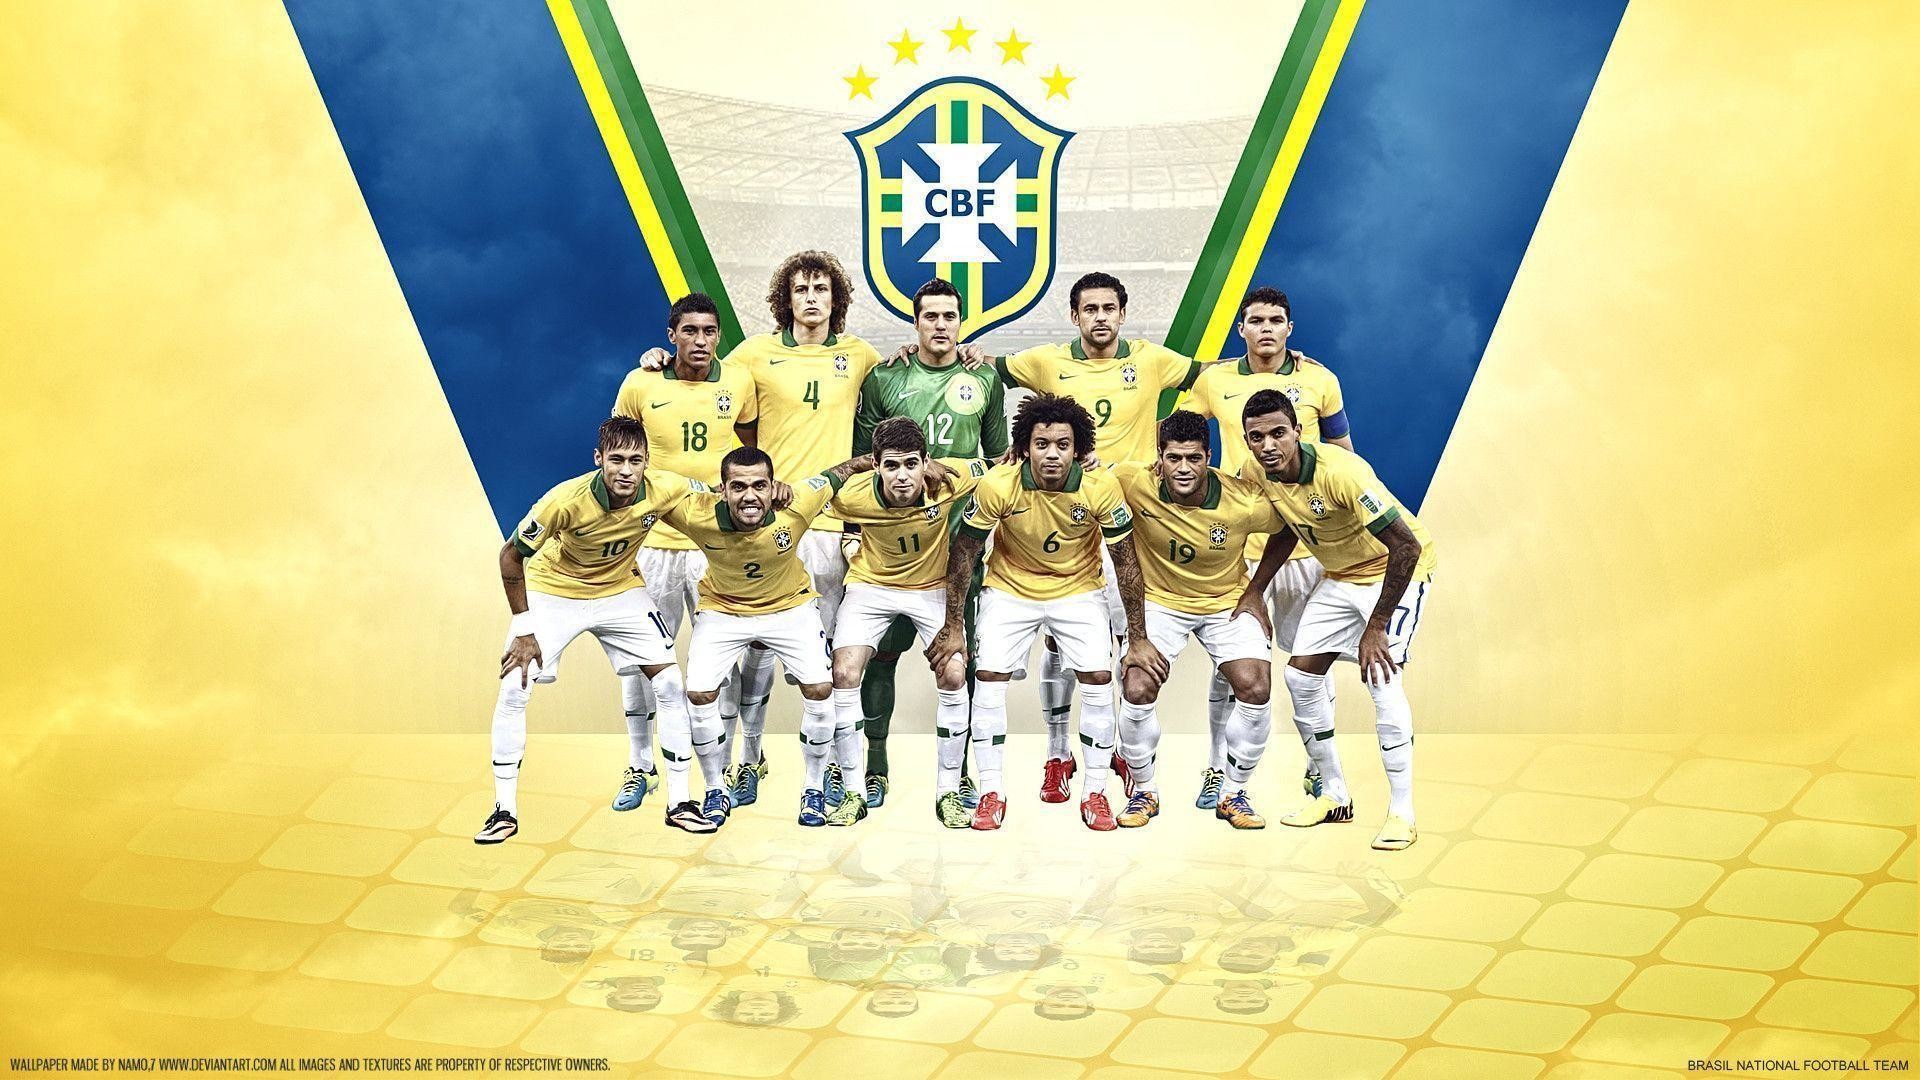 1920x1080 Cool Brazil national team 2014 images for wallpaper in HD .